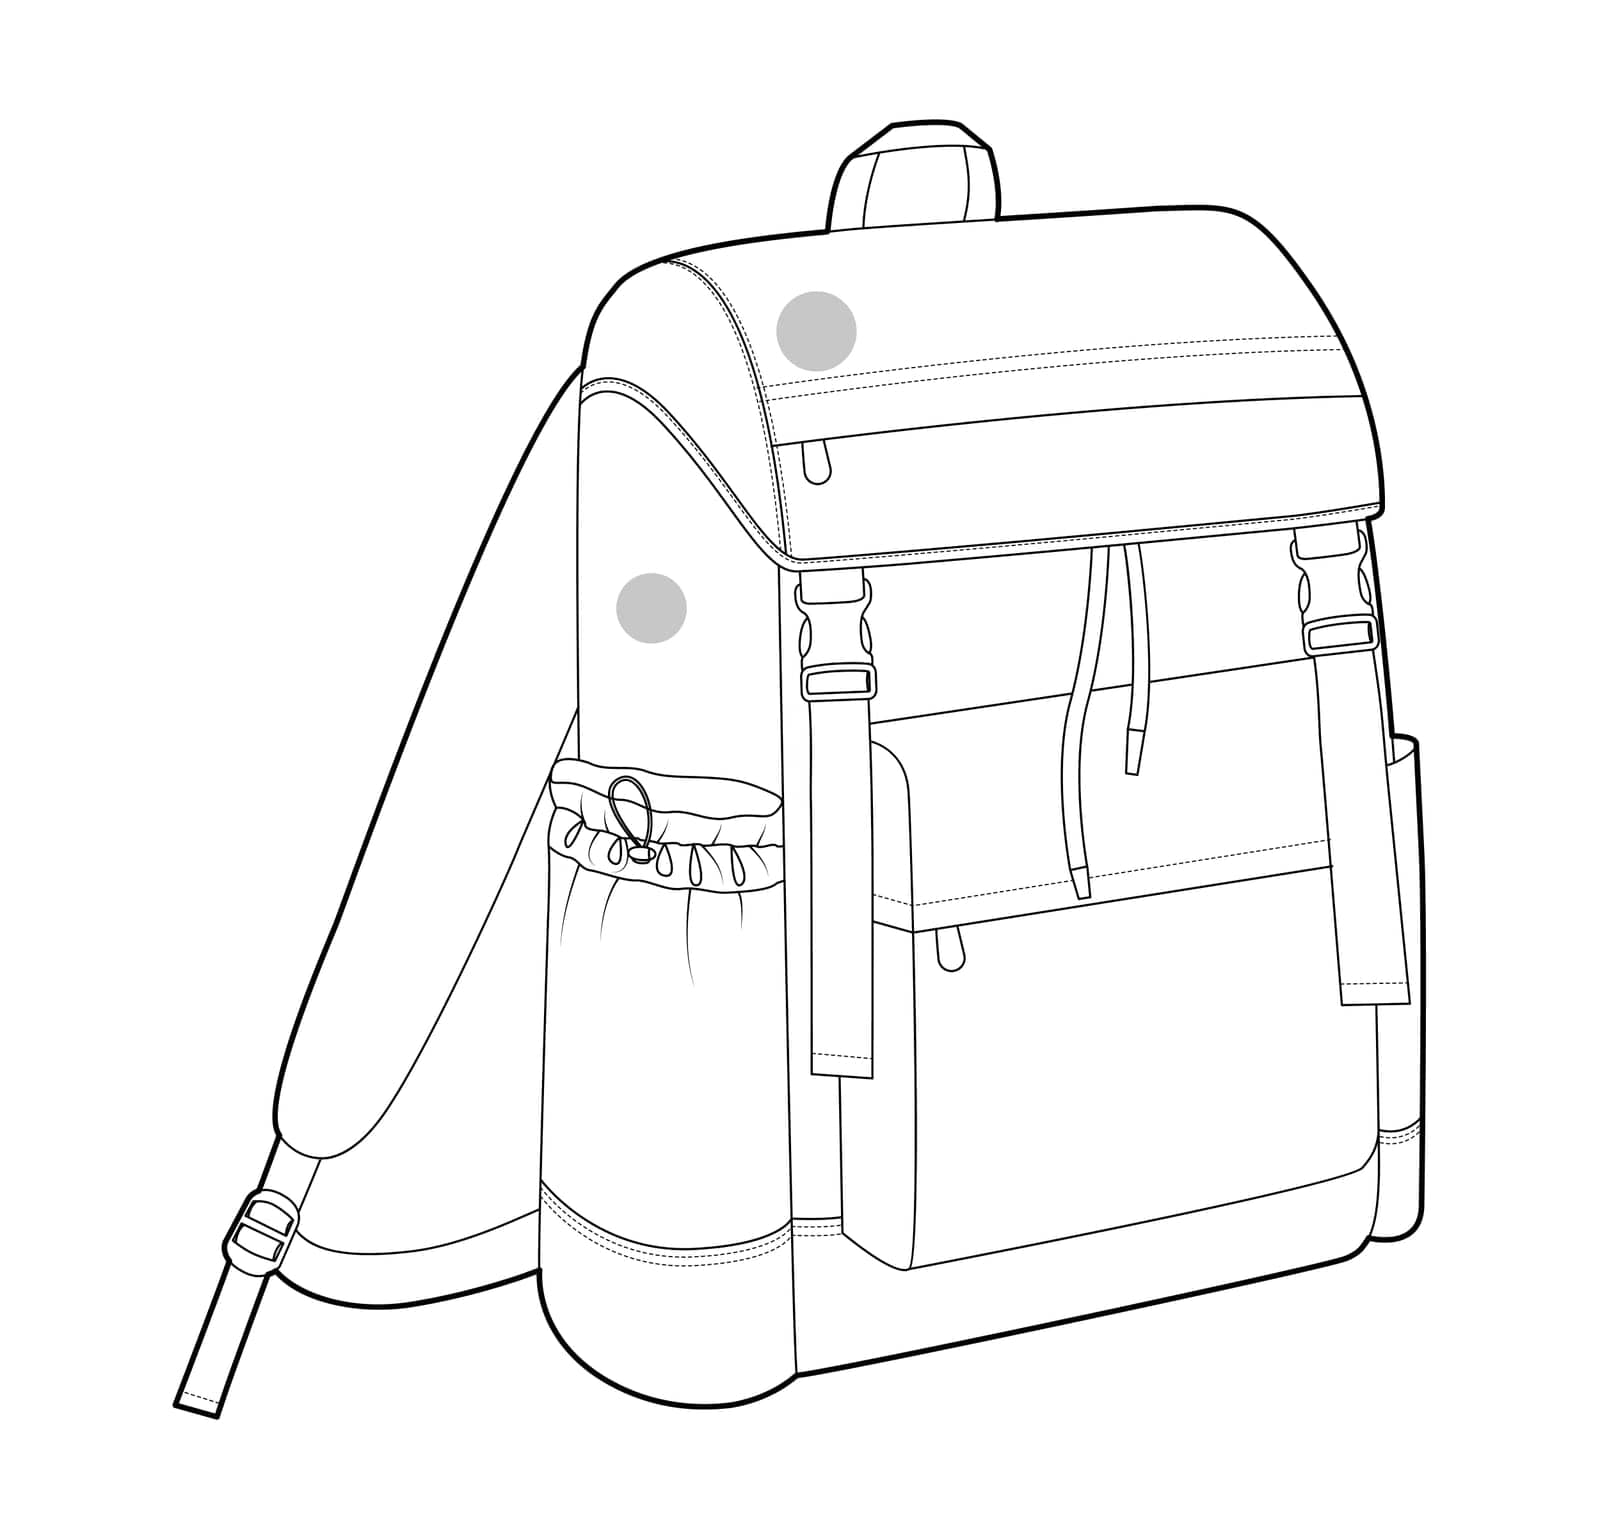 Adventure backpack silhouette bag. Fashion accessory technical illustration. Vector schoolbag 3-4 view for Men, women, unisex style, flat handbag CAD mockup sketch outline isolated